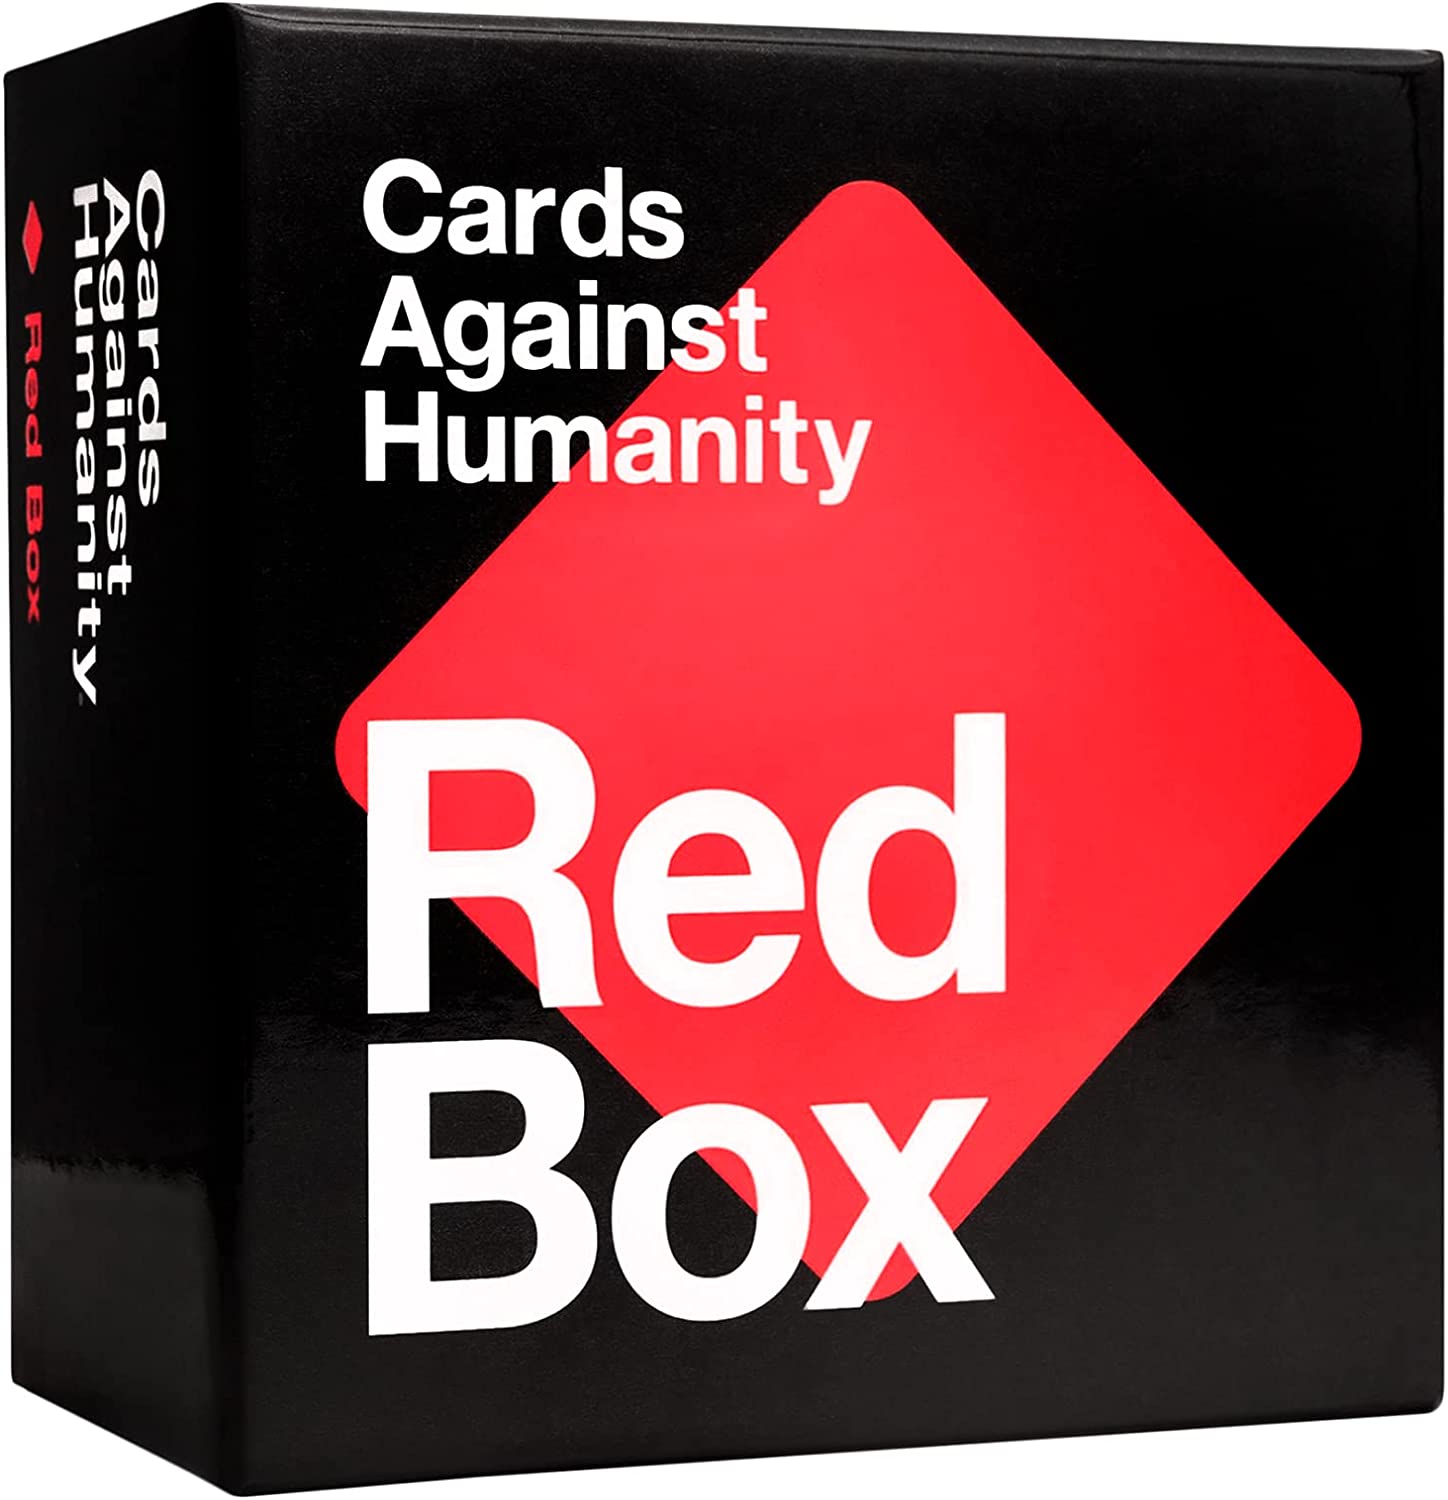 Cards Against Humanity uitbreiding - Red Box